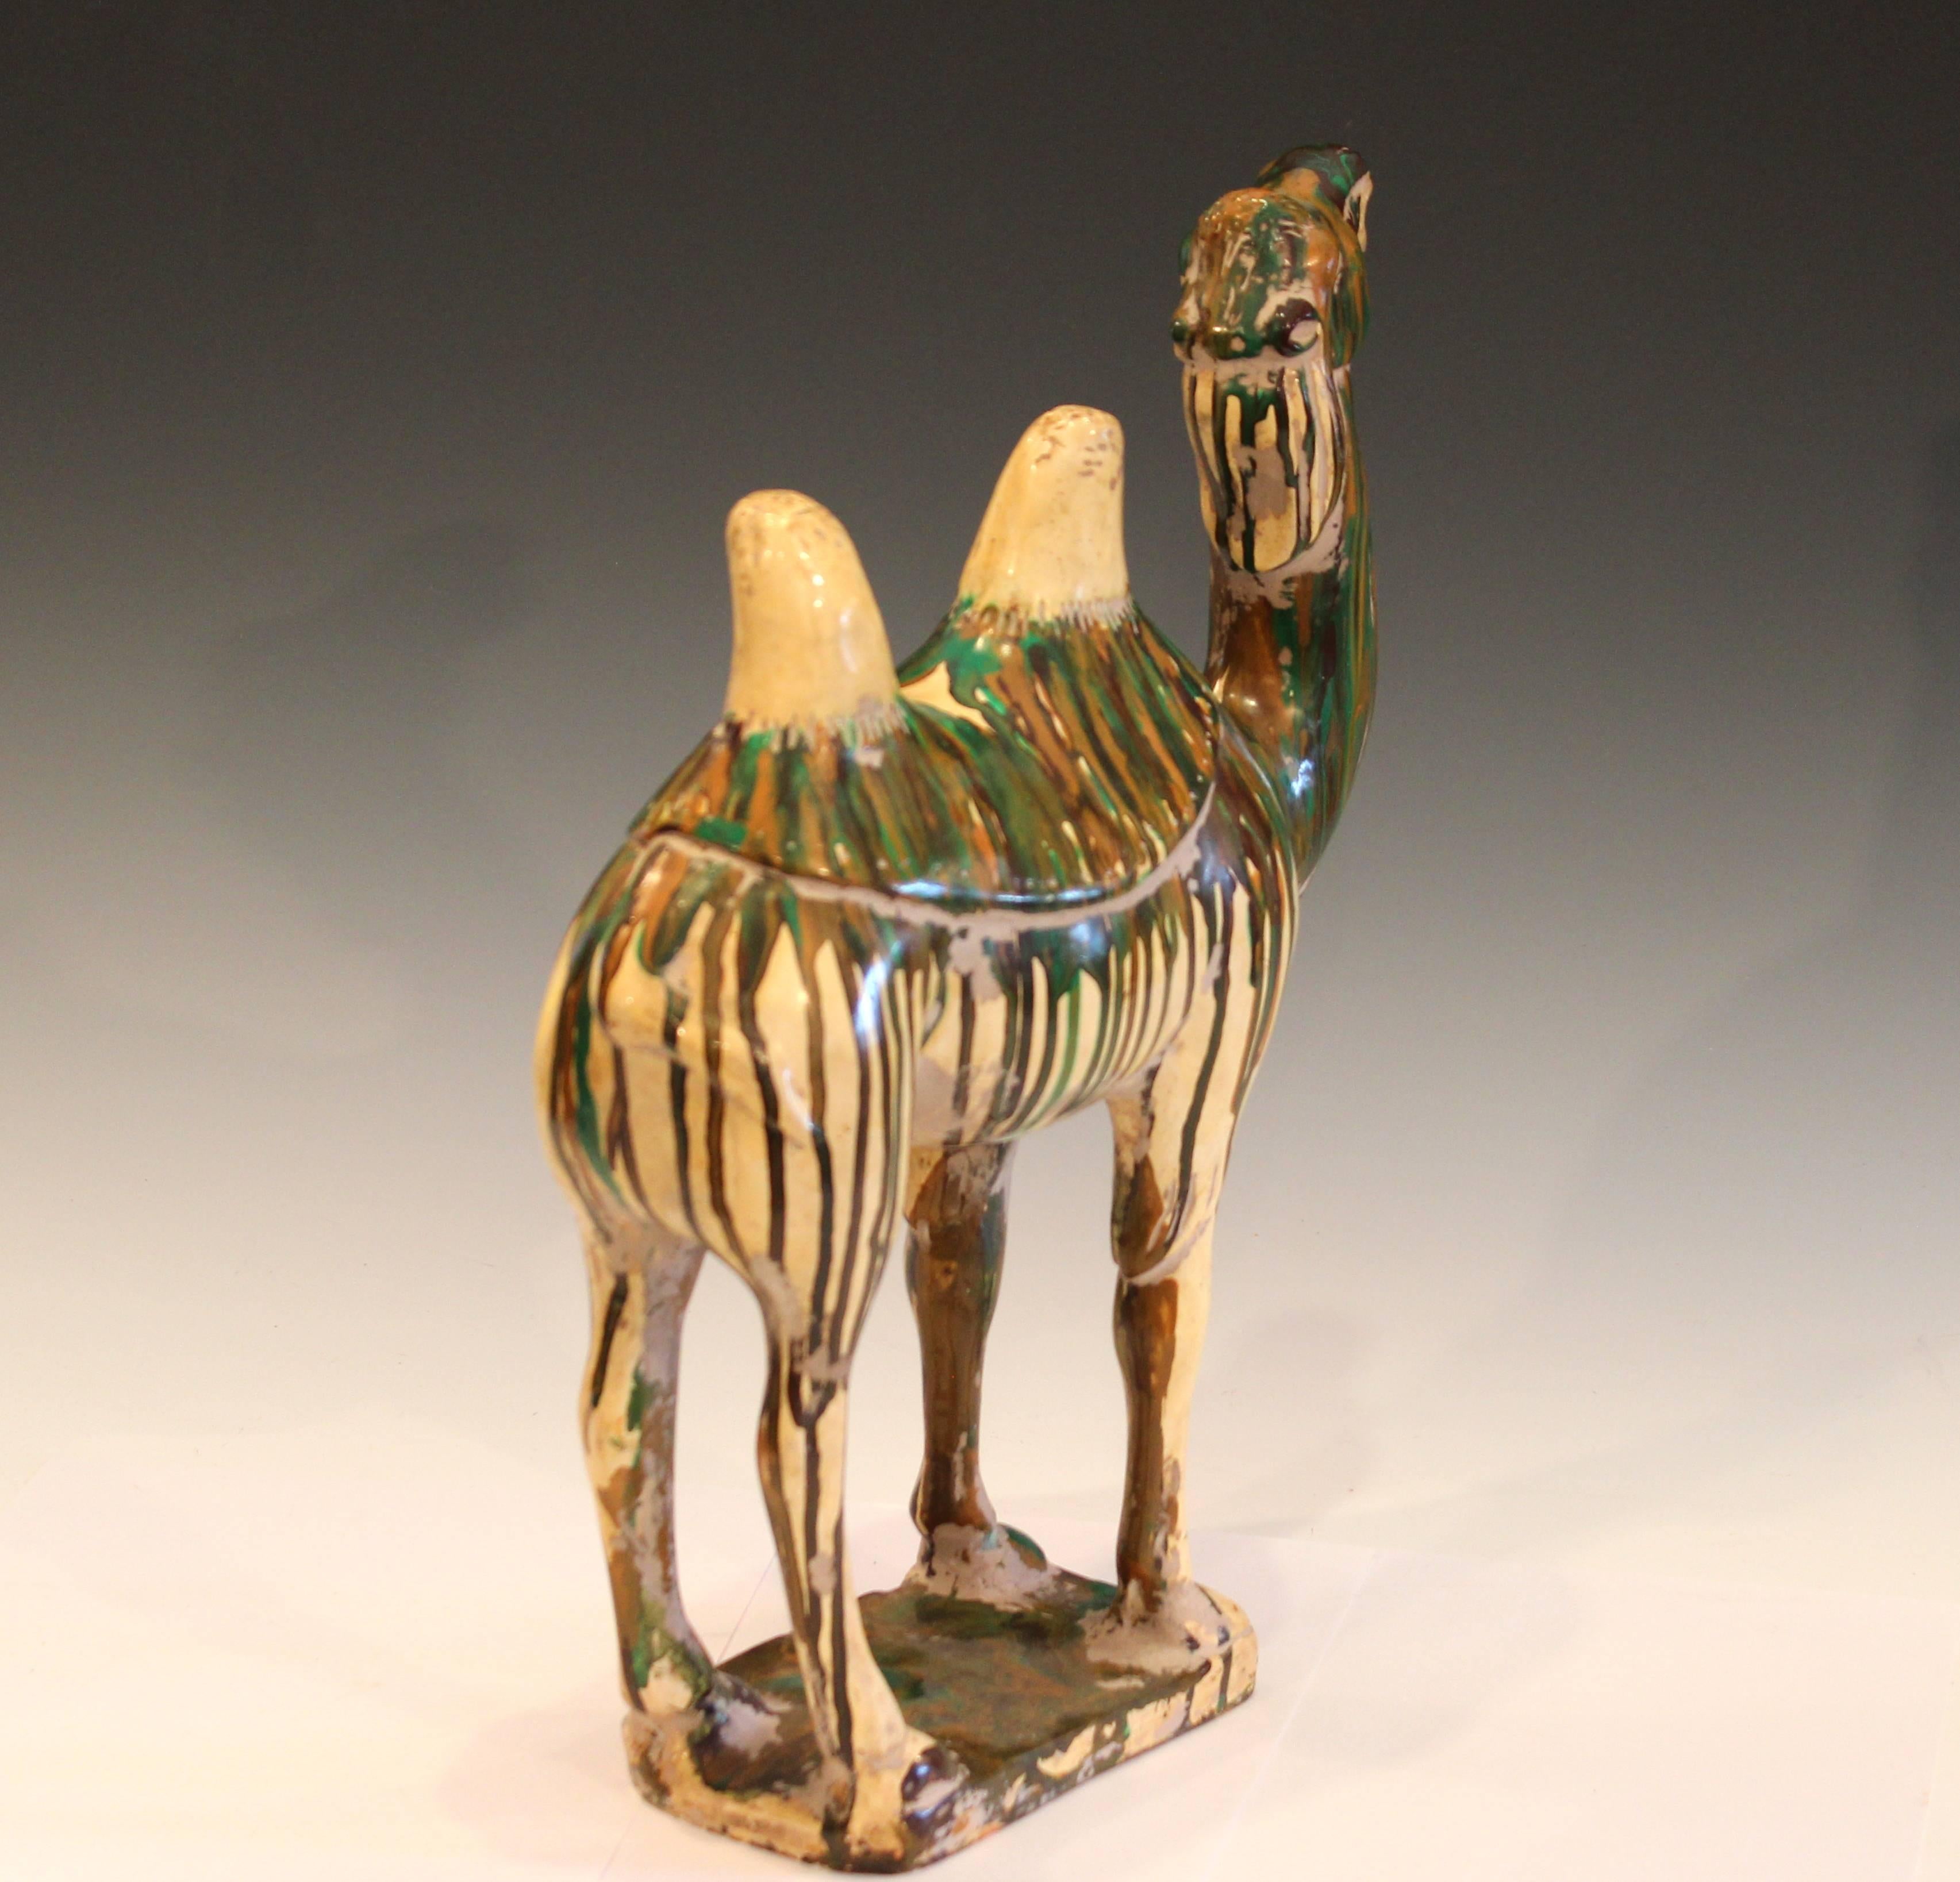 Molded Vintage Tang Style Folk Art Pottery Two Hump Camel Figure Sculpture, 1960s For Sale